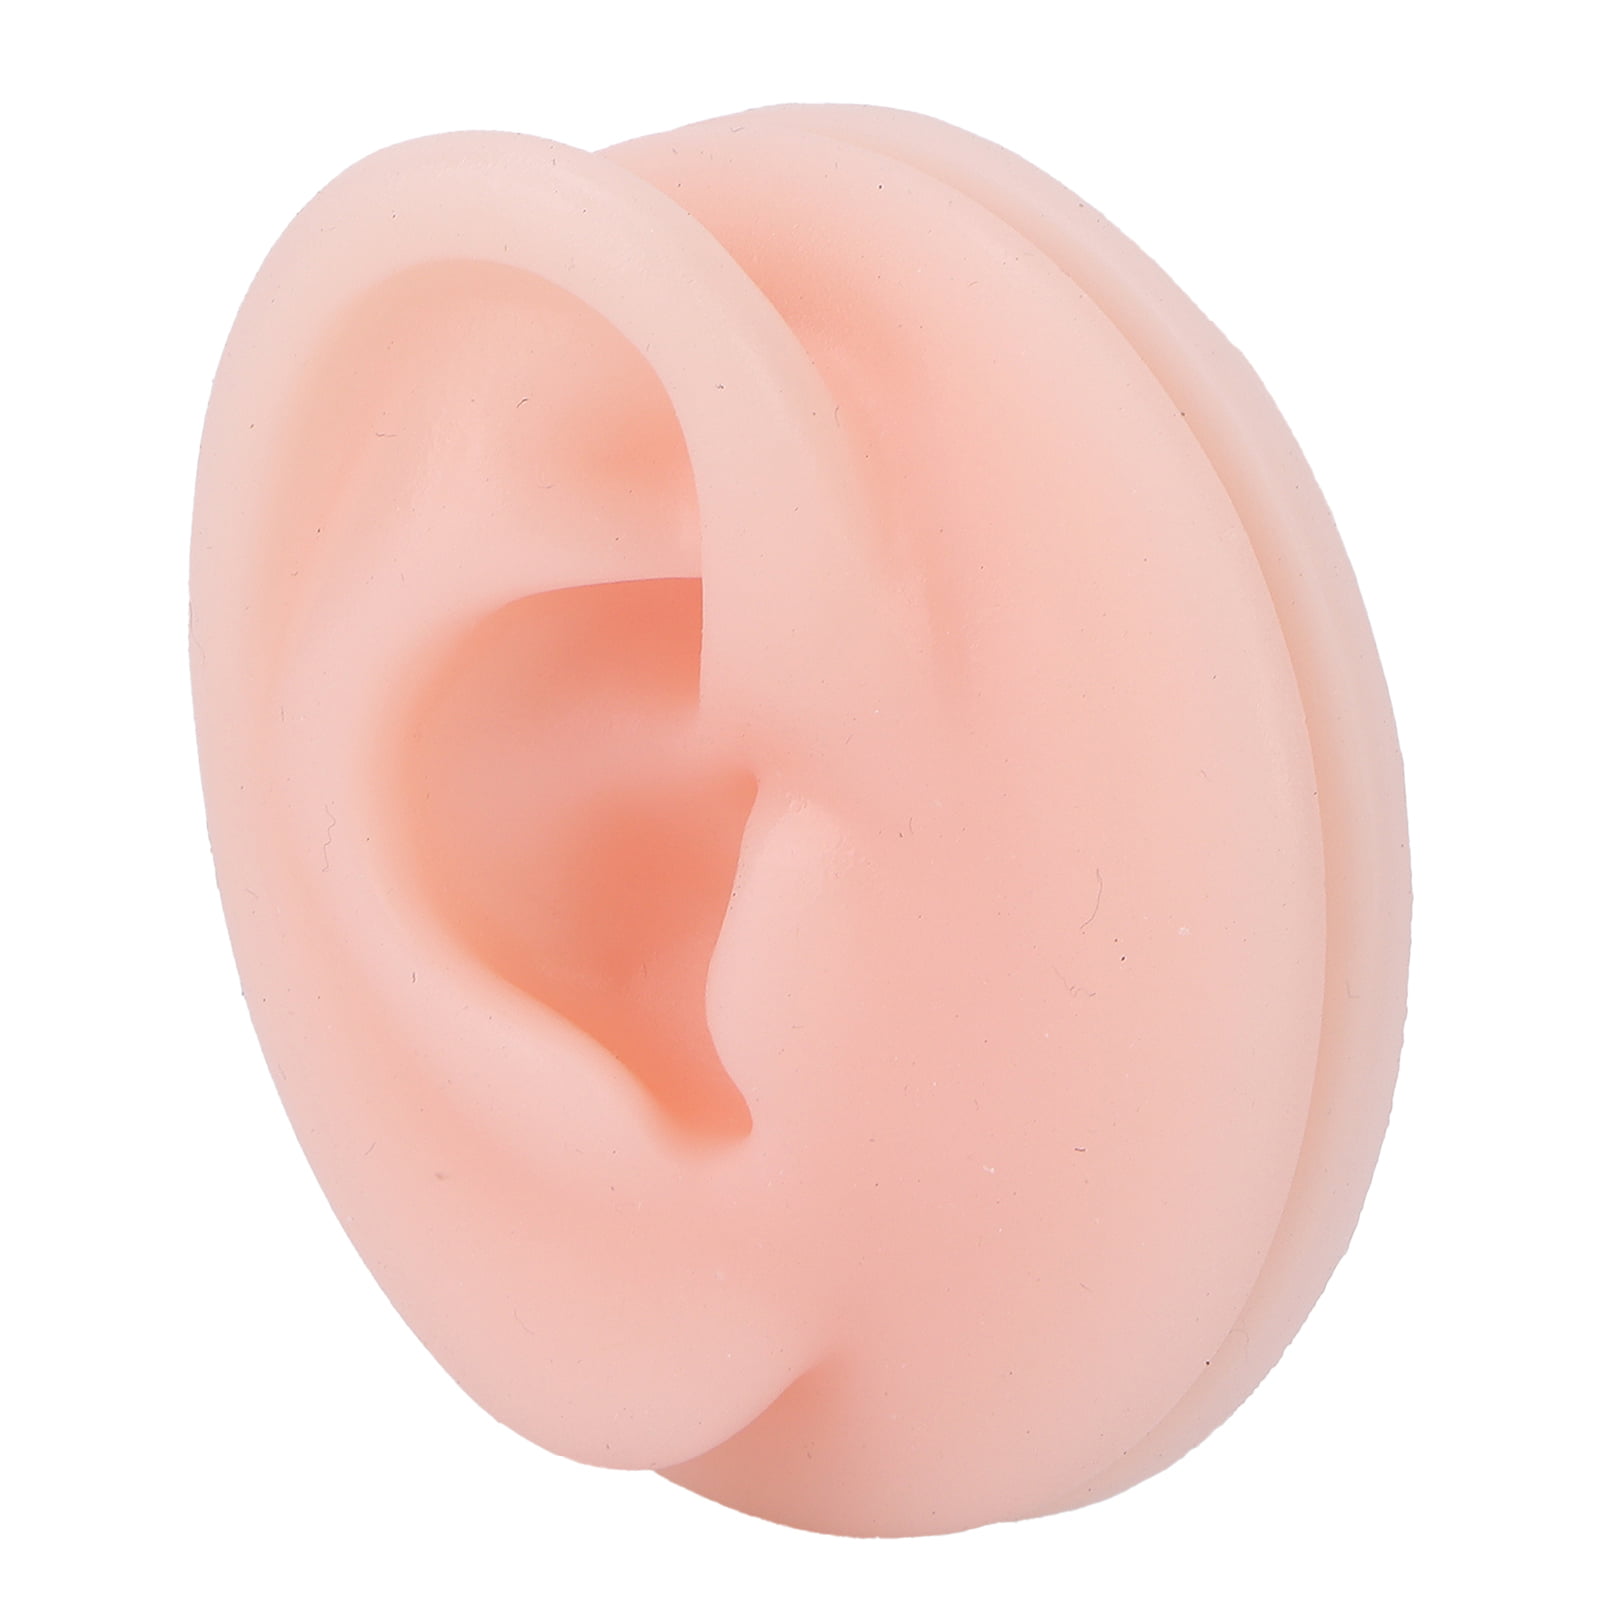 Binaural recording Artificial Ears Acupuncture Silicone ears 